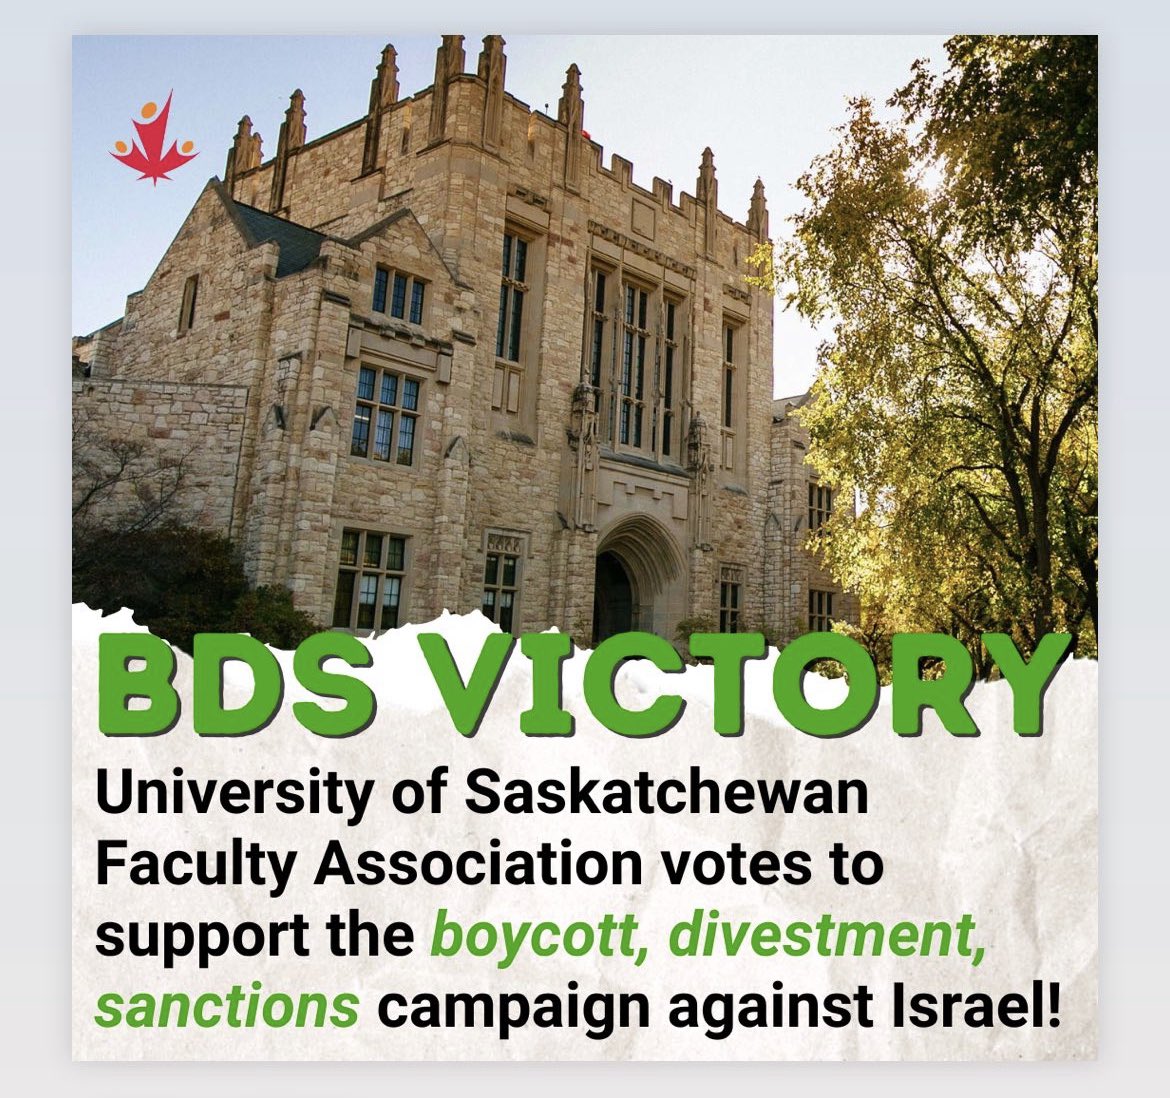 Politically there is not much for me to feel hopeful about in Saskatchewan but this is truly one thing that brought me joy. We must celebrate the wins, as small as they may be!! 

Free Palestine 🇵🇸 ✊🏽

Thank you @usask faculty that voted in support of this! 🙌🏽👏🏽